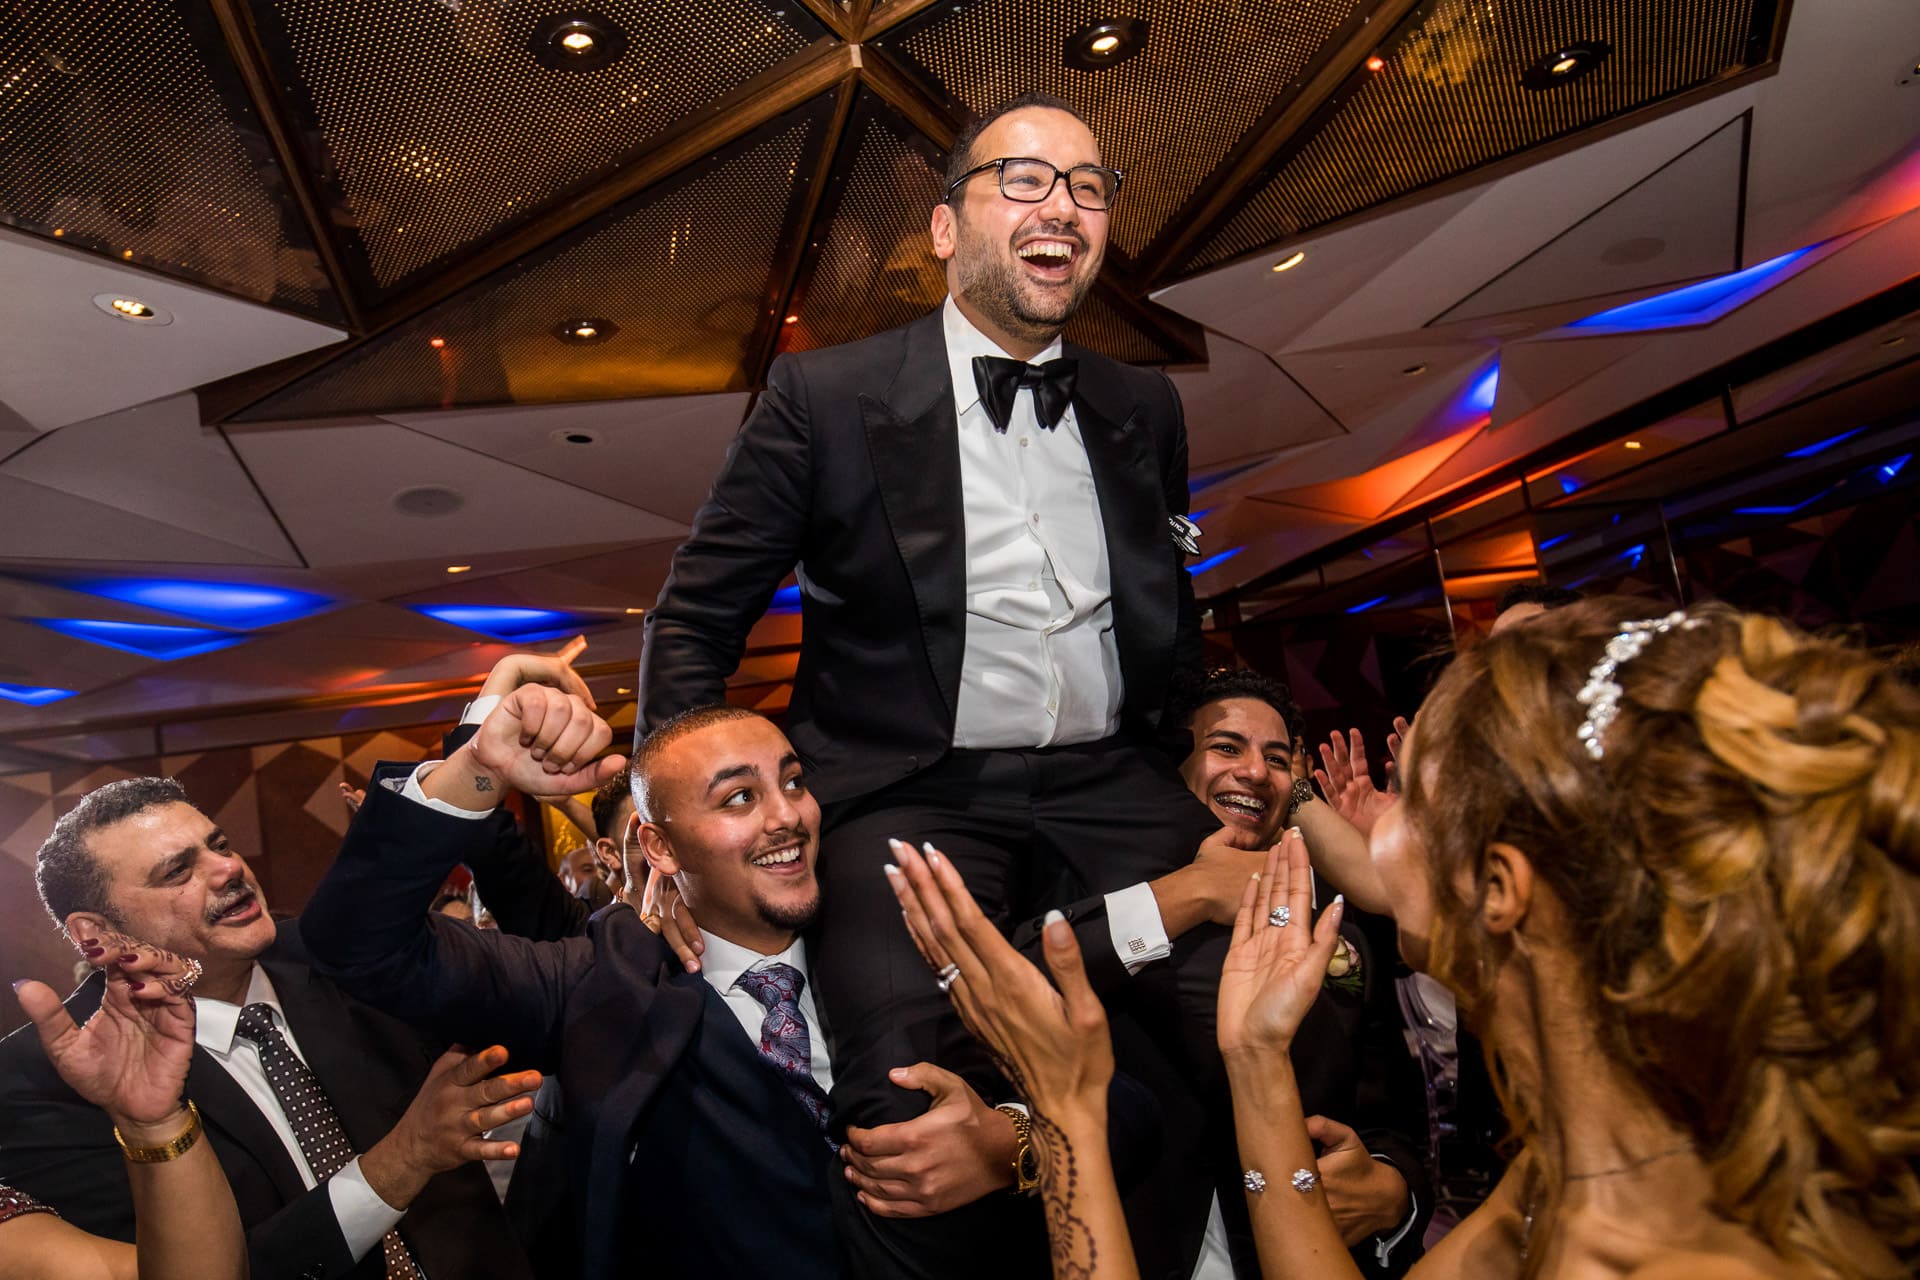 groom being lifted by his friends